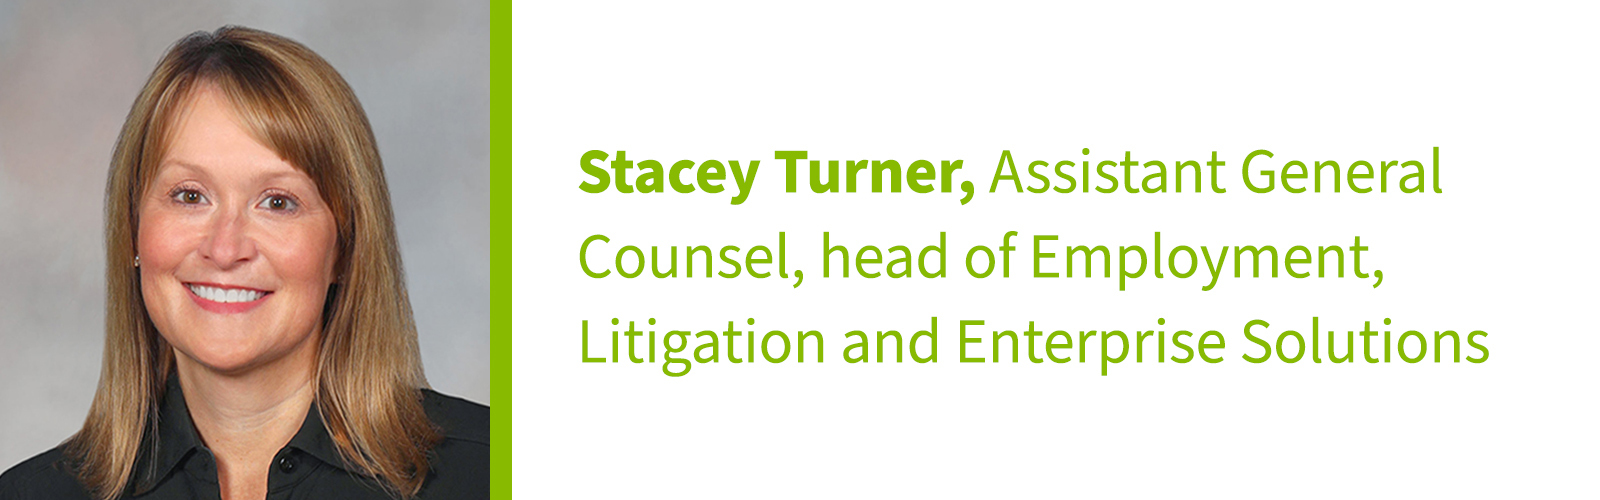 Stacey Turner headshot and title